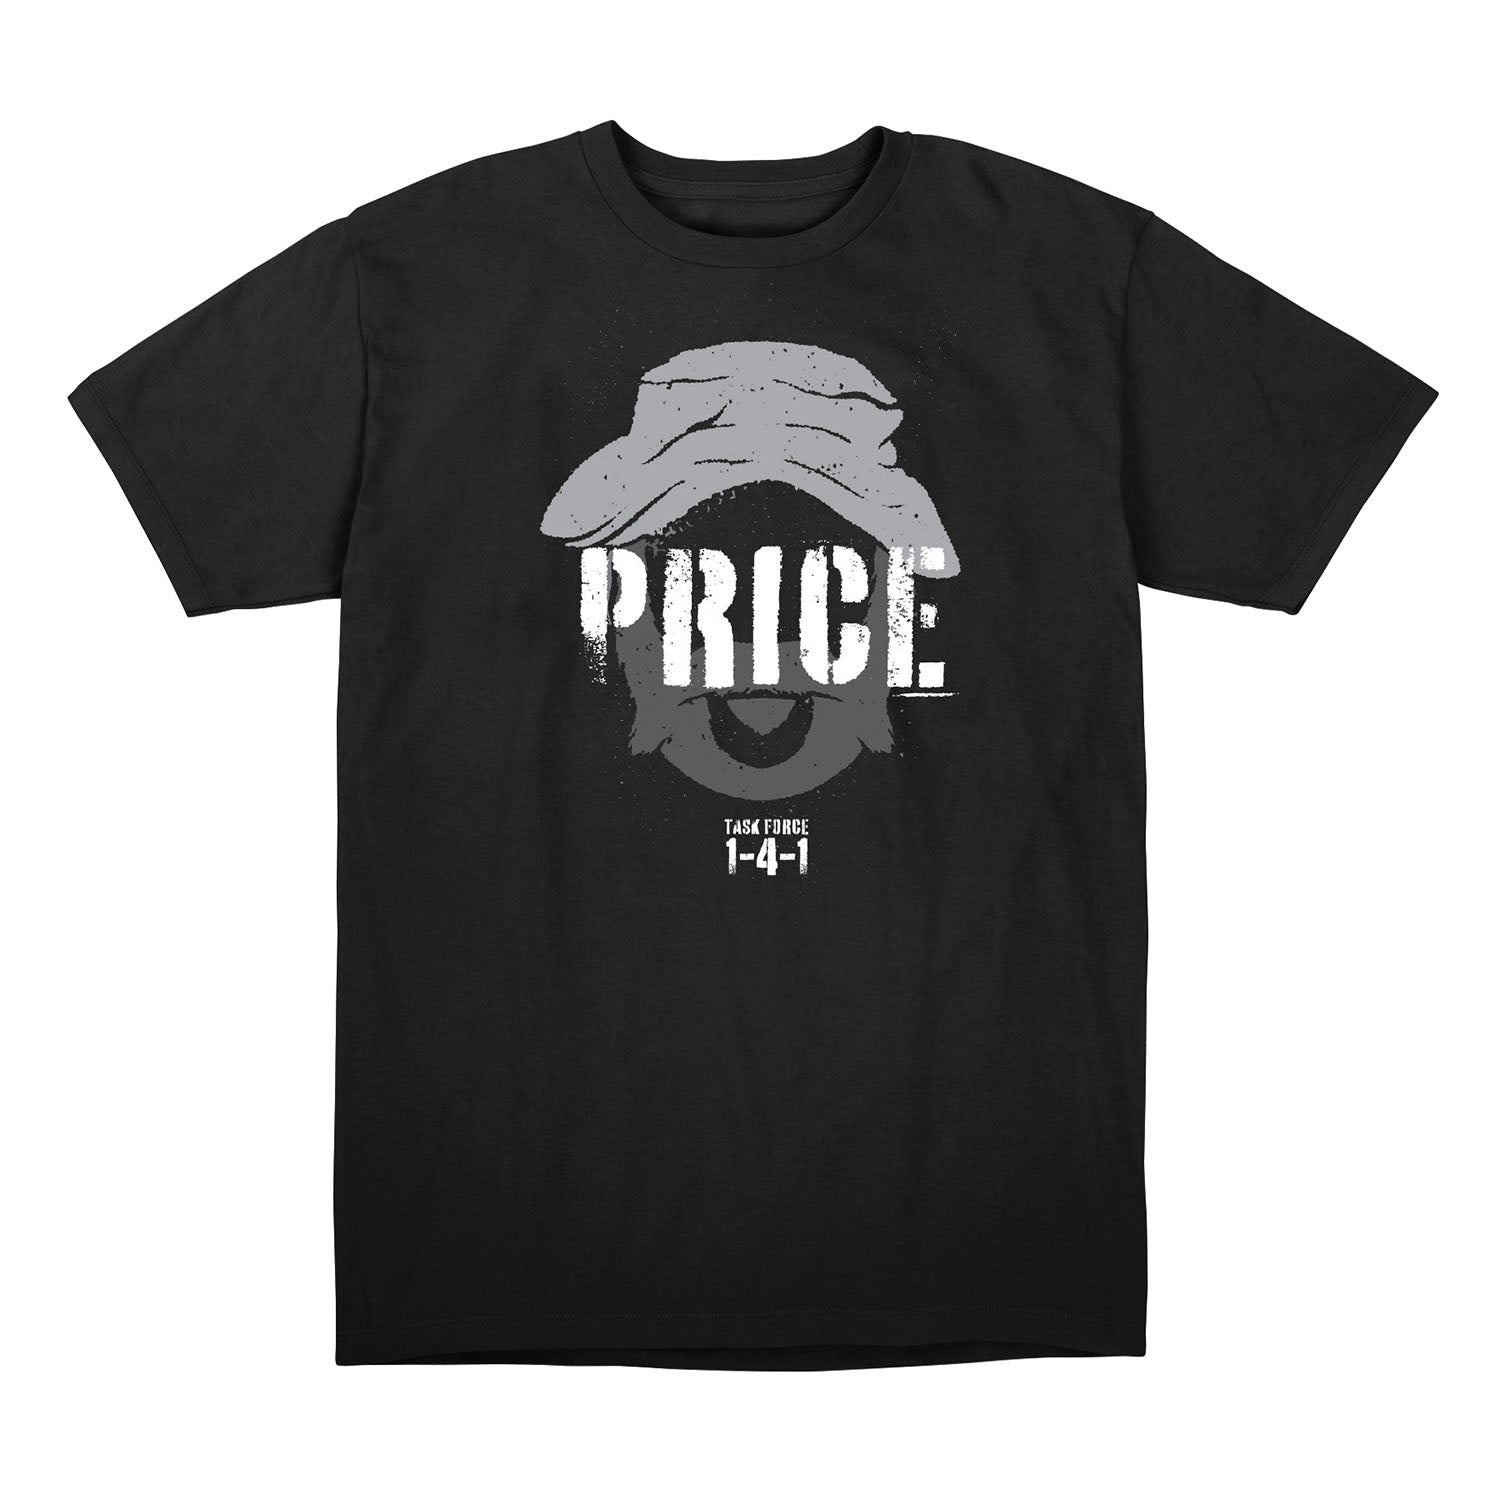 Call of Duty Price Silhouette Black T-Shirt - Front View